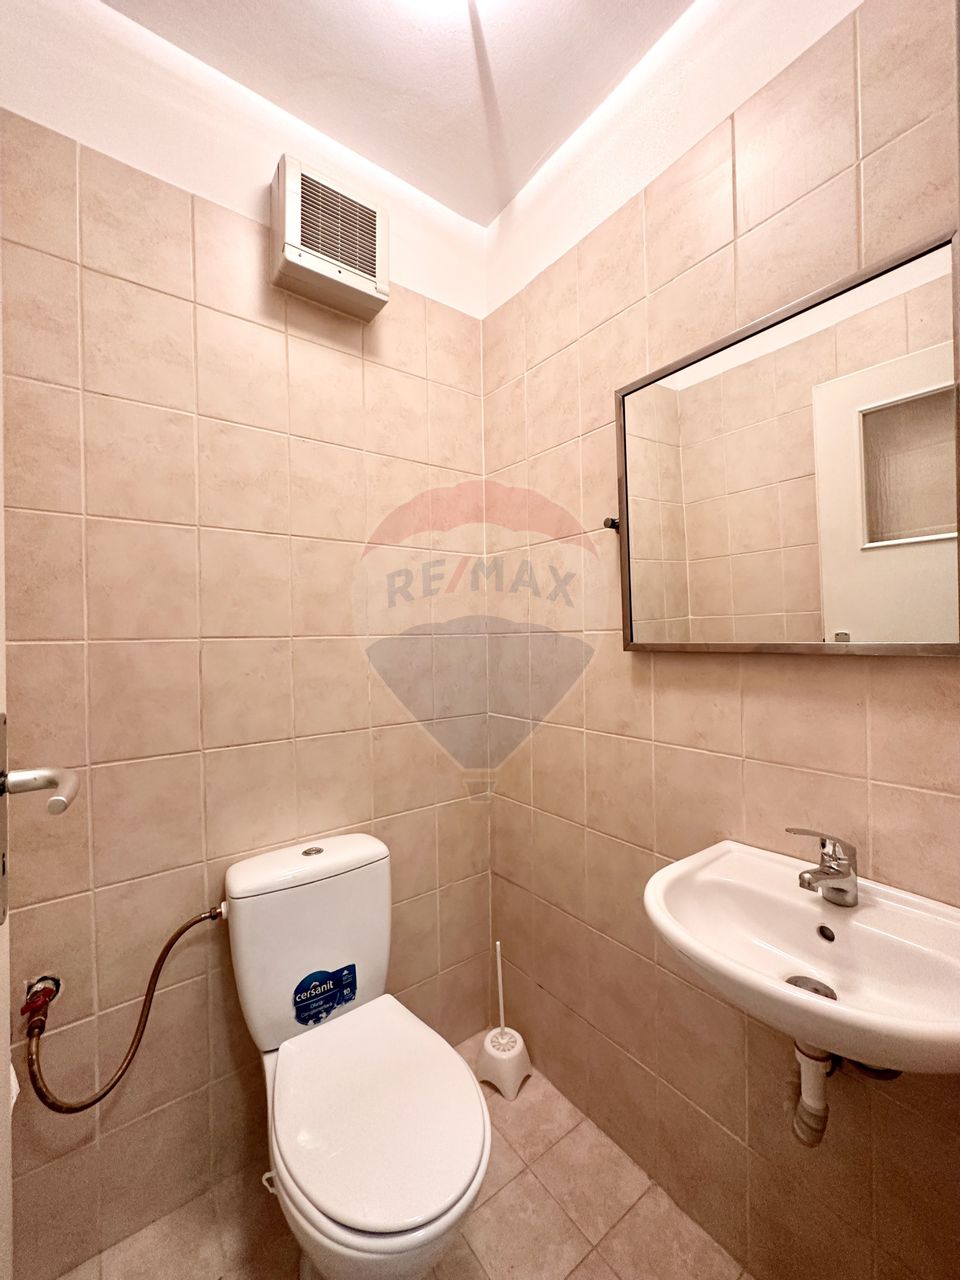 3 room Apartment for rent, Doamna Ghica area